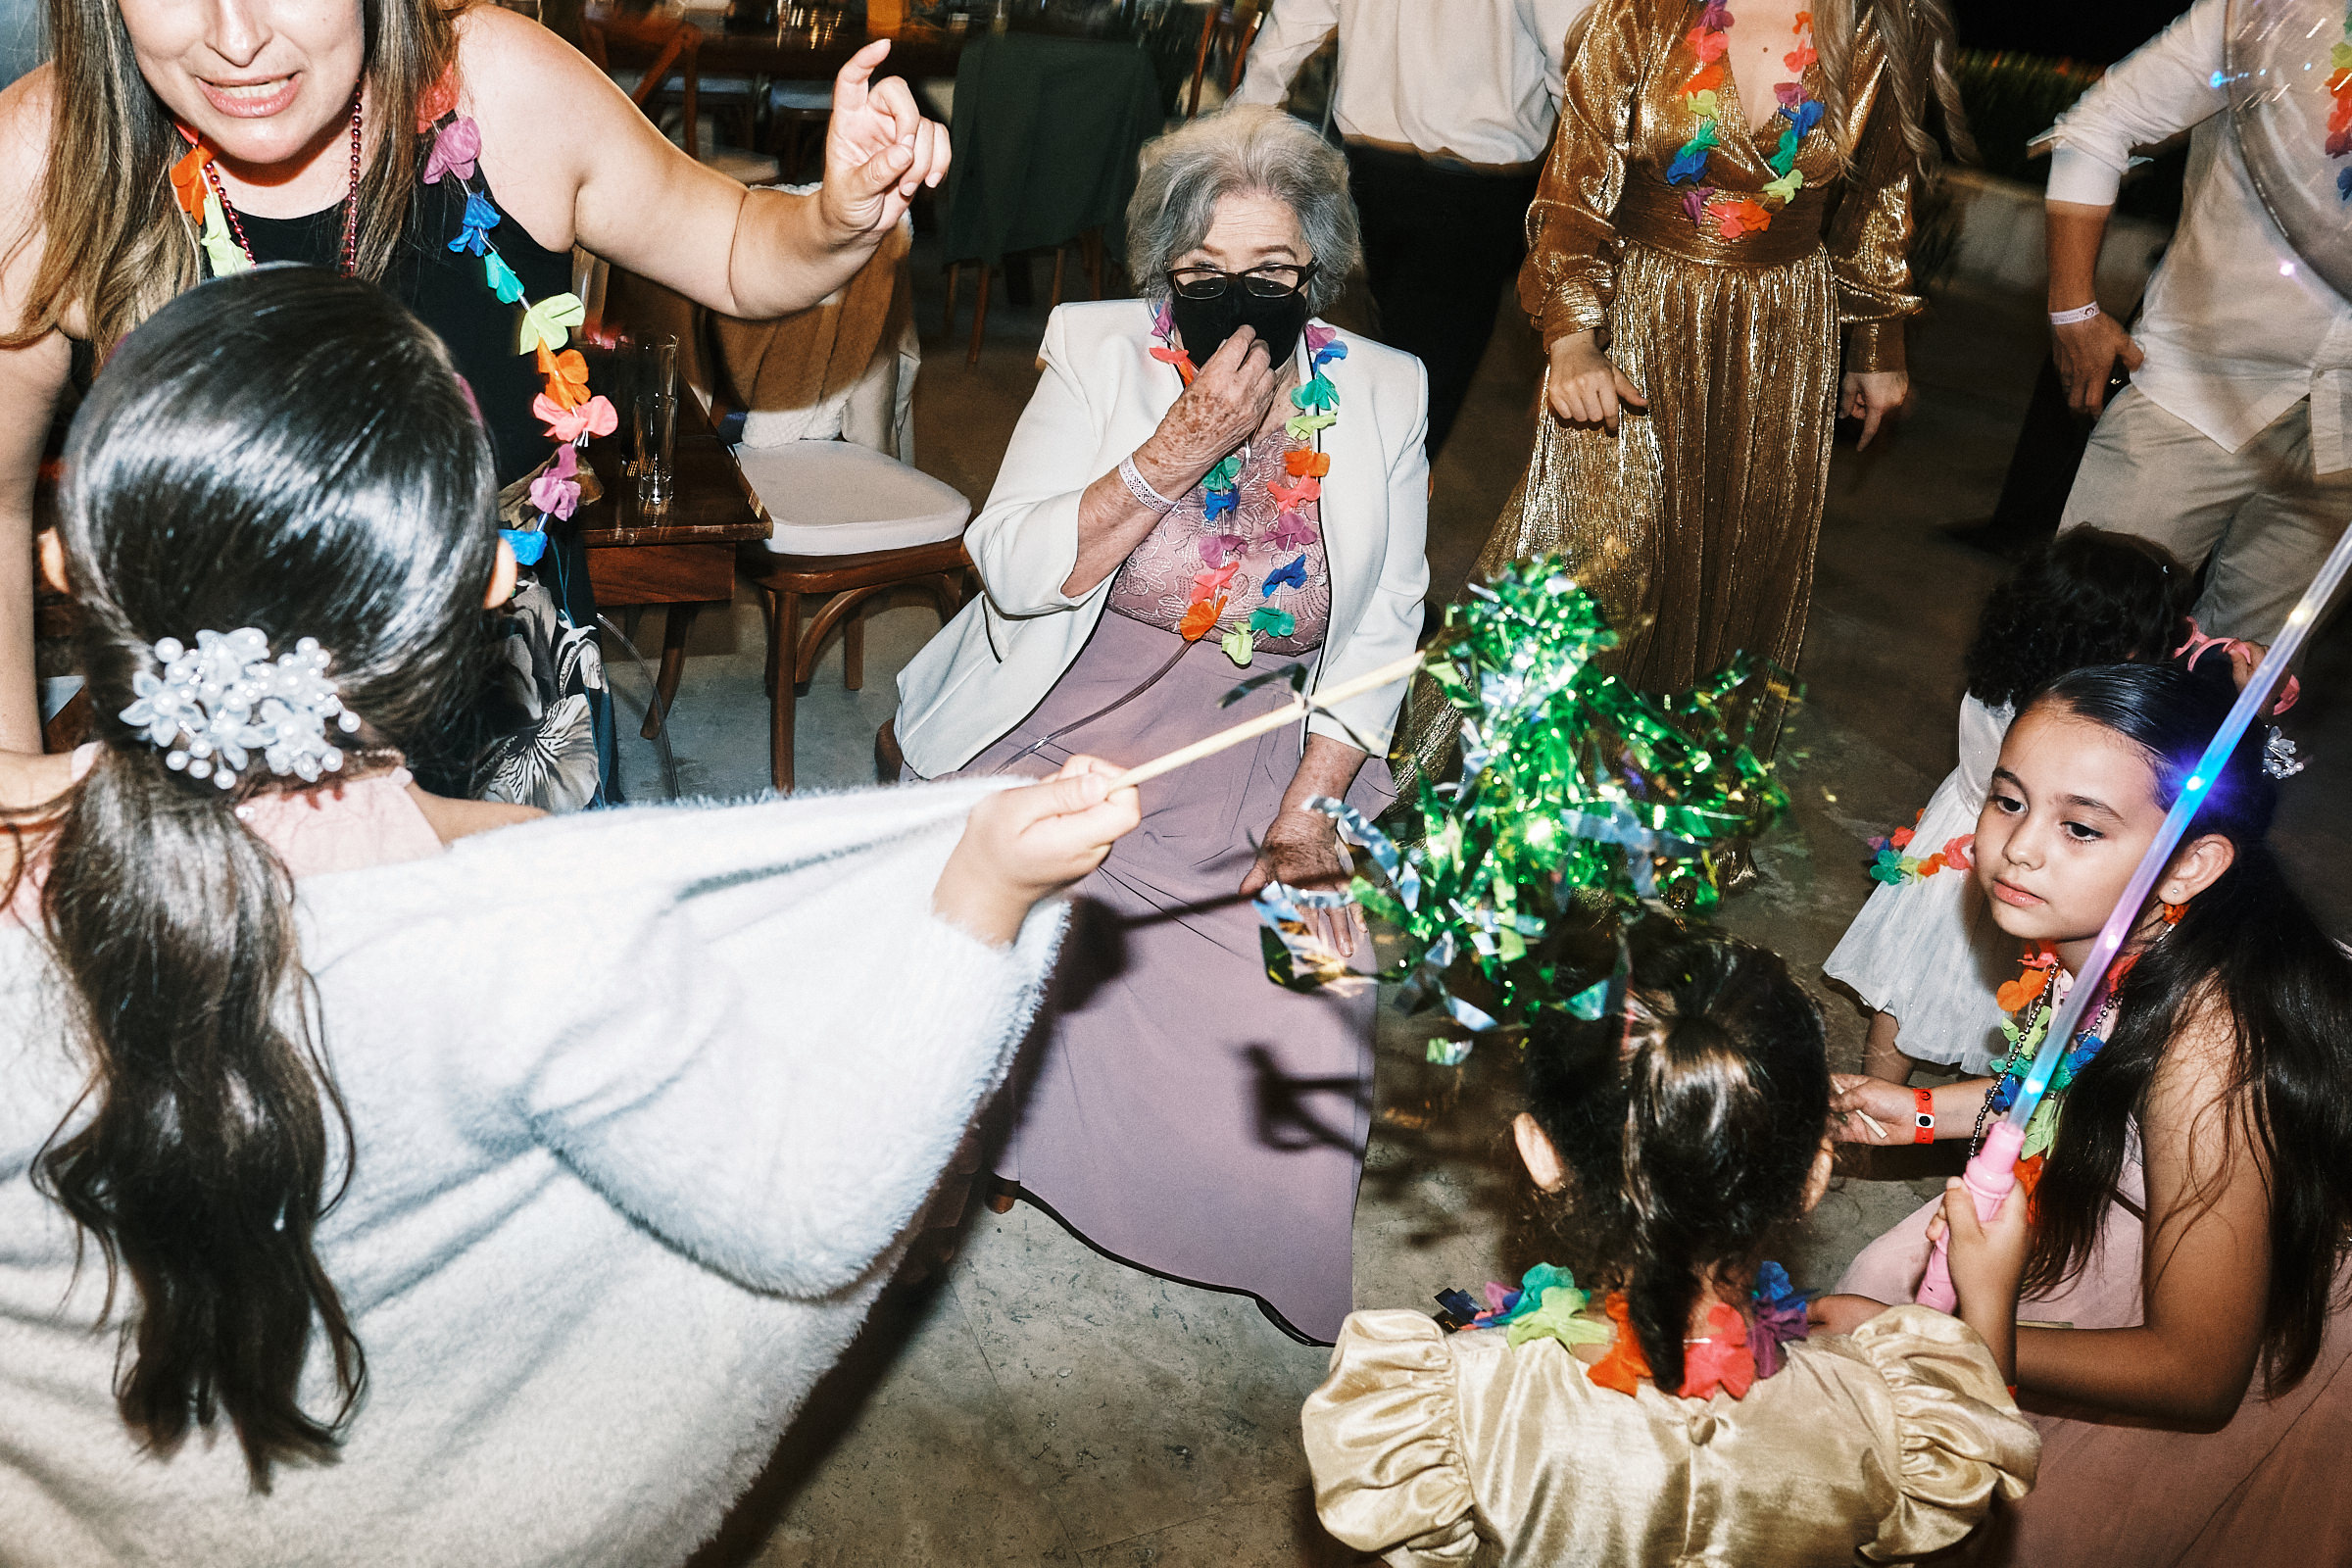 Energetic Wide Image Of Grandma And Children At Wedding Reception